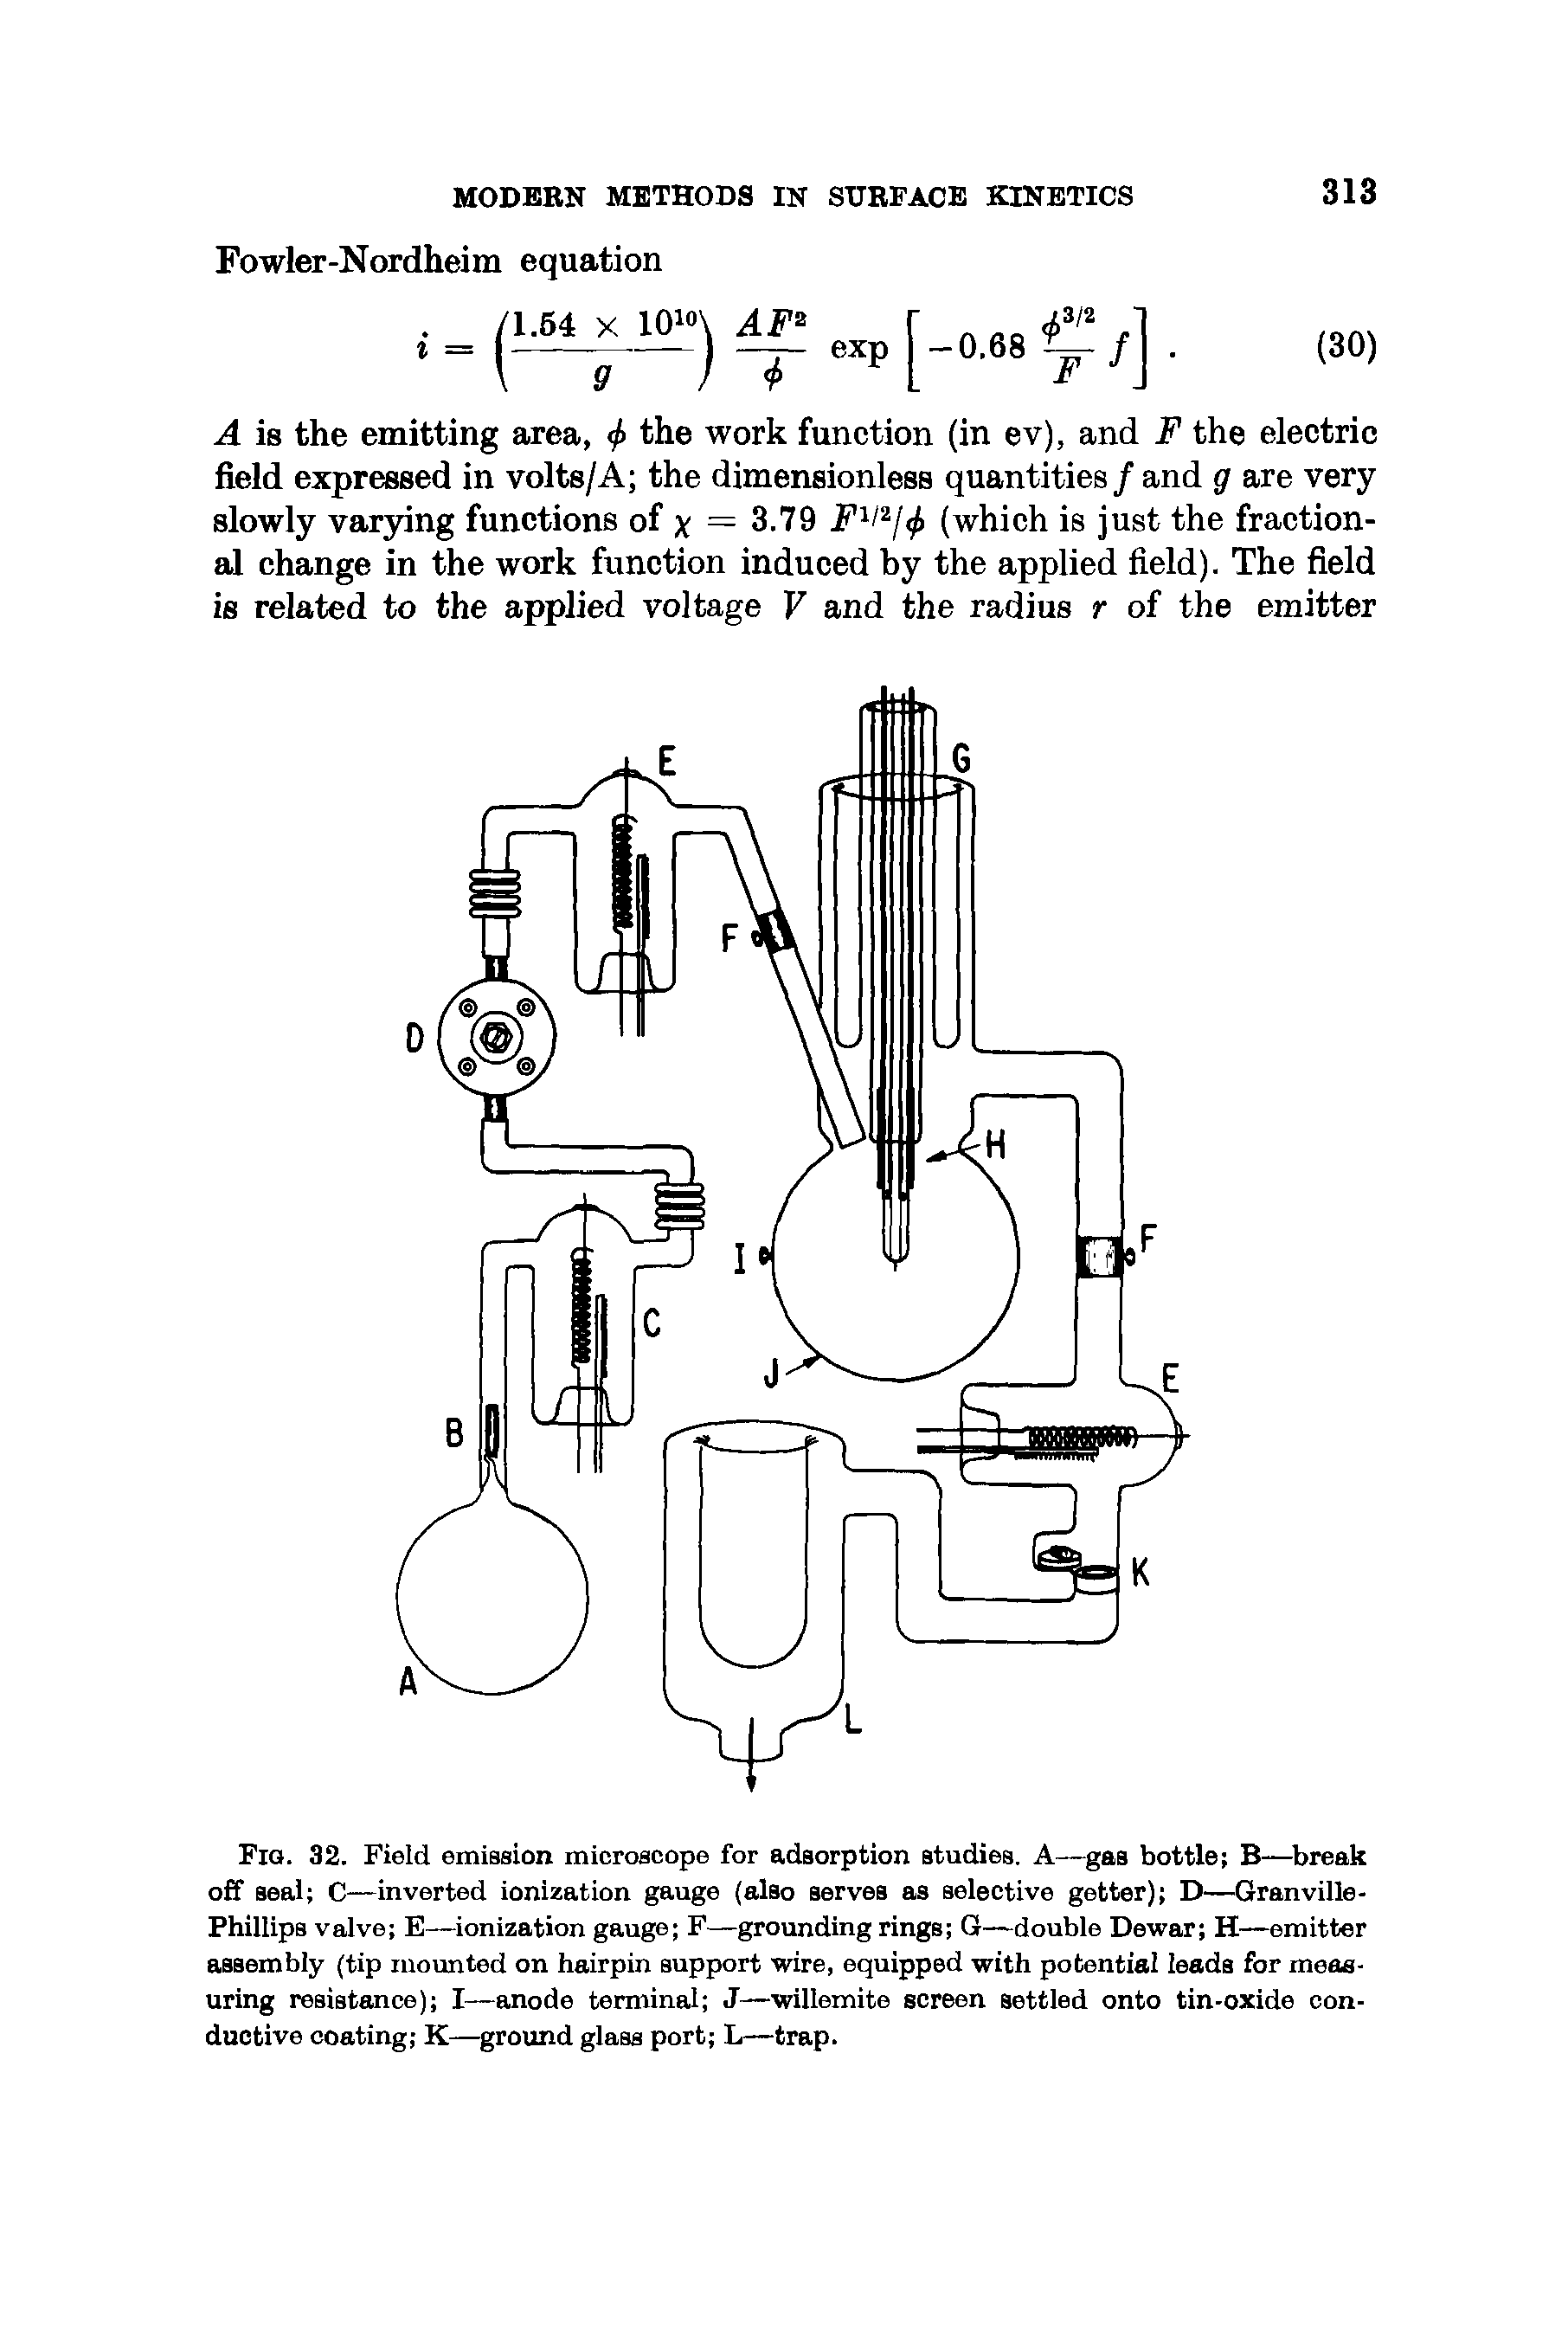 Fig. 32. Field emission microscope for adsorption studies. A—gas bottle B—break off seal C—inverted ionization gauge (also serves as selective getter) D—Granville-Phillips valve E—ionization gauge F—grounding rings G—double Dewar H—emitter assembly (tip mounted on hairpin support wire, equipped with potential leads for measuring resistance) I—anode terminal J—willemite screen settled onto tin-oxide conductive coating K—ground glass port L—trap.